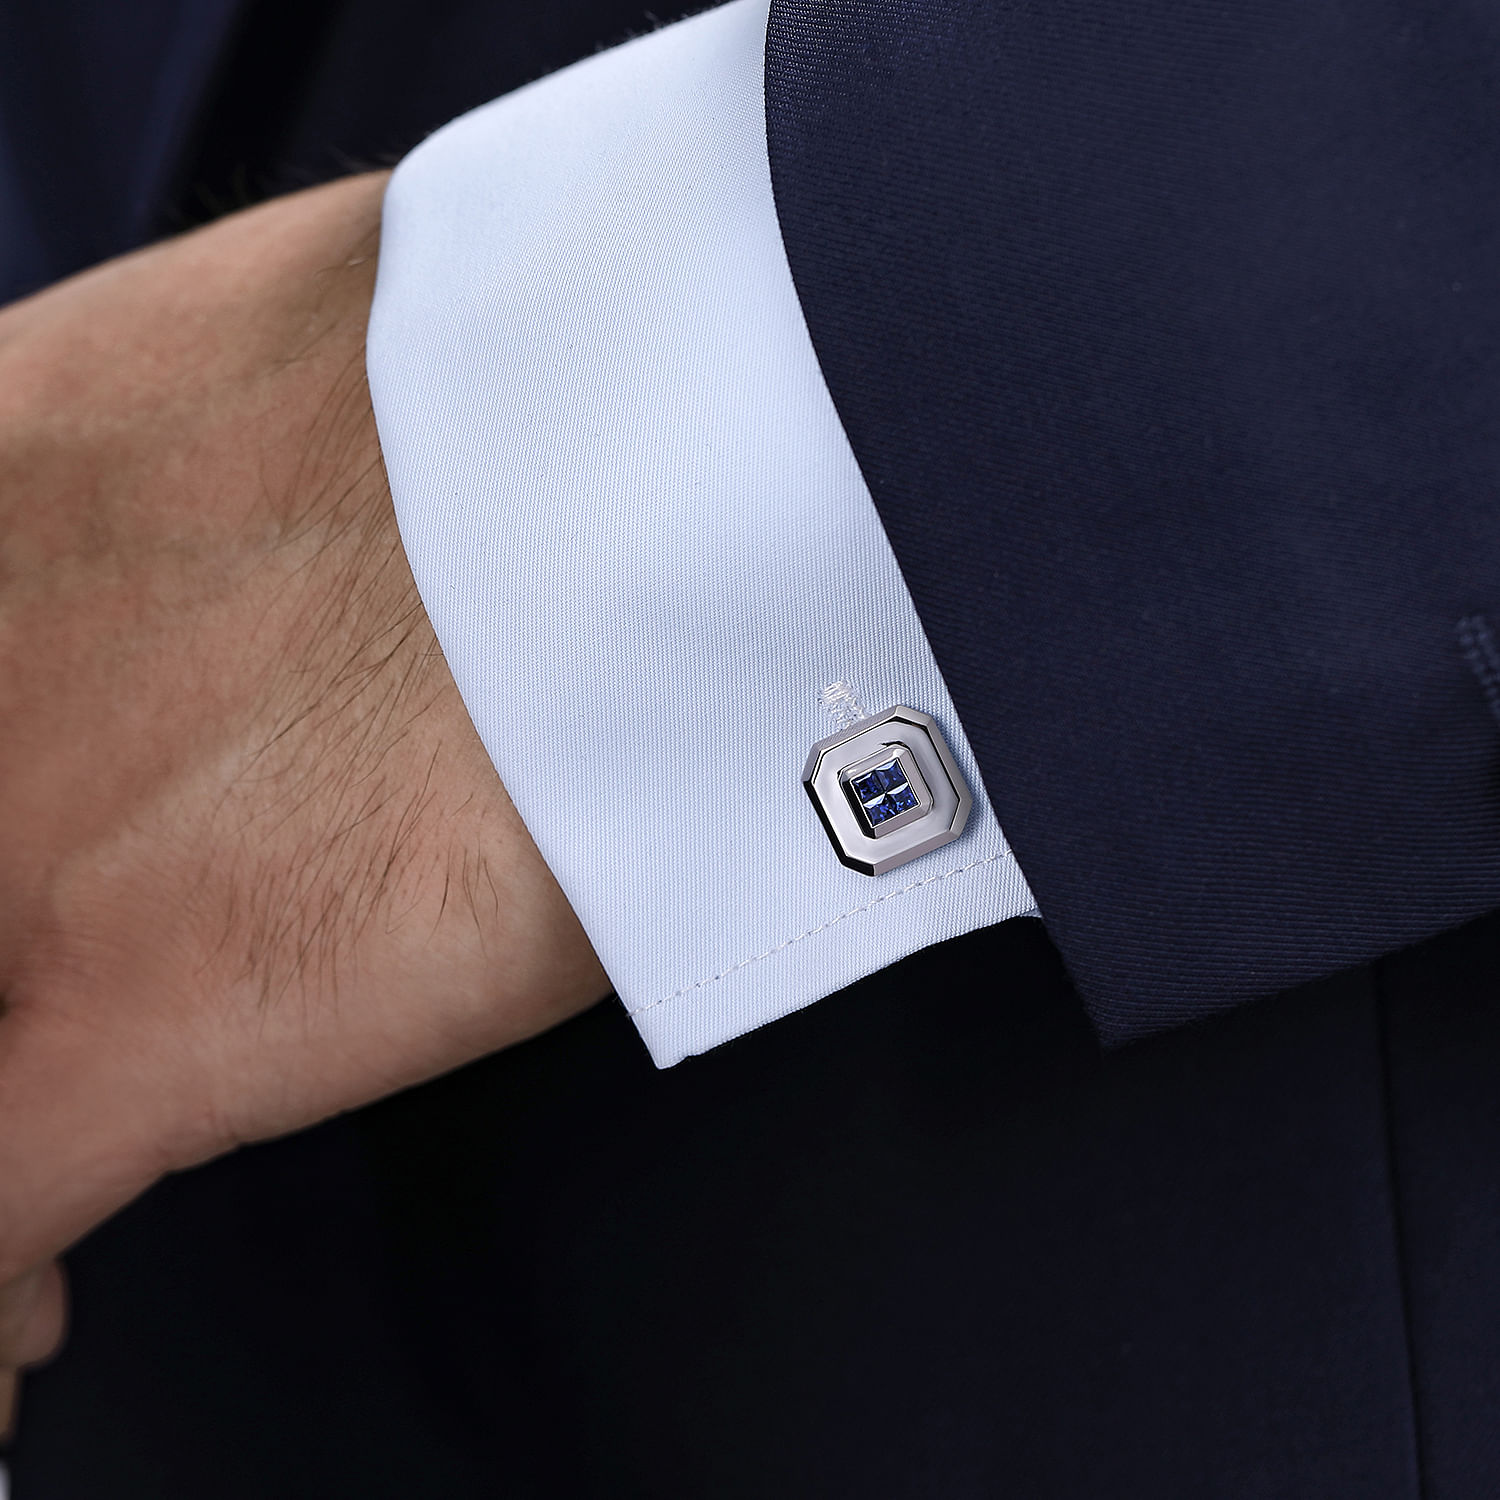 925 Sterling Silver Square Cufflinks with Princess Cut Sapphire Stones